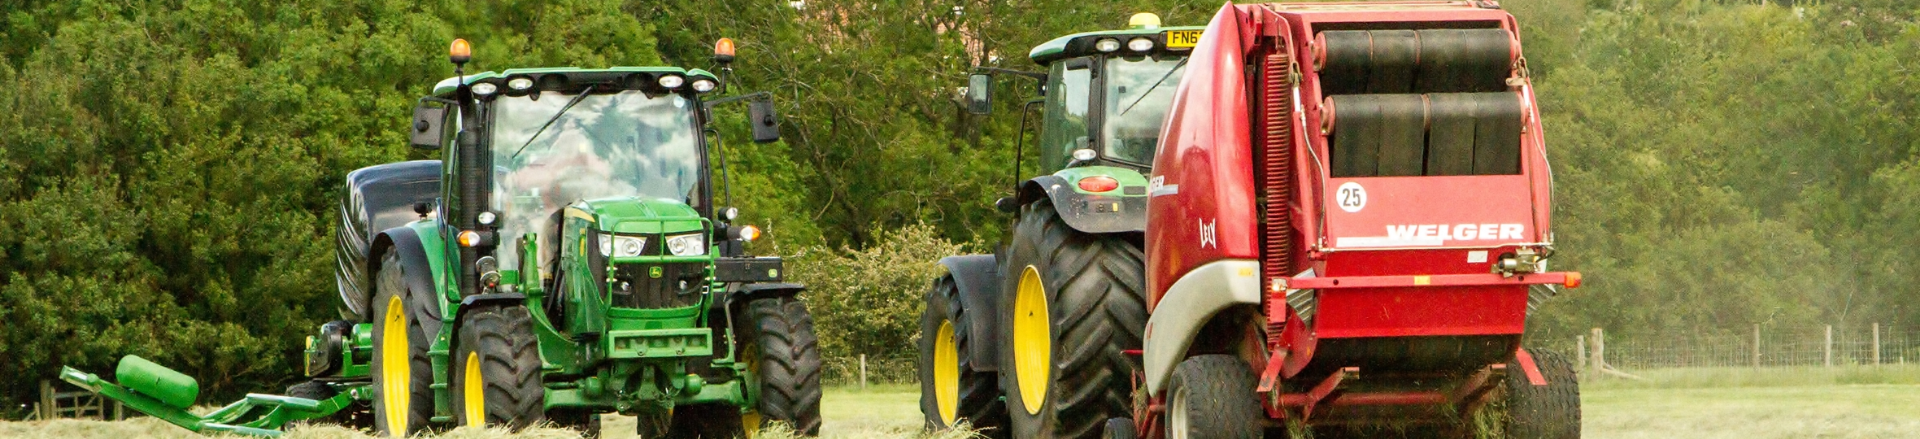 Two tractors adorned with decorative decals in a field next to each other.